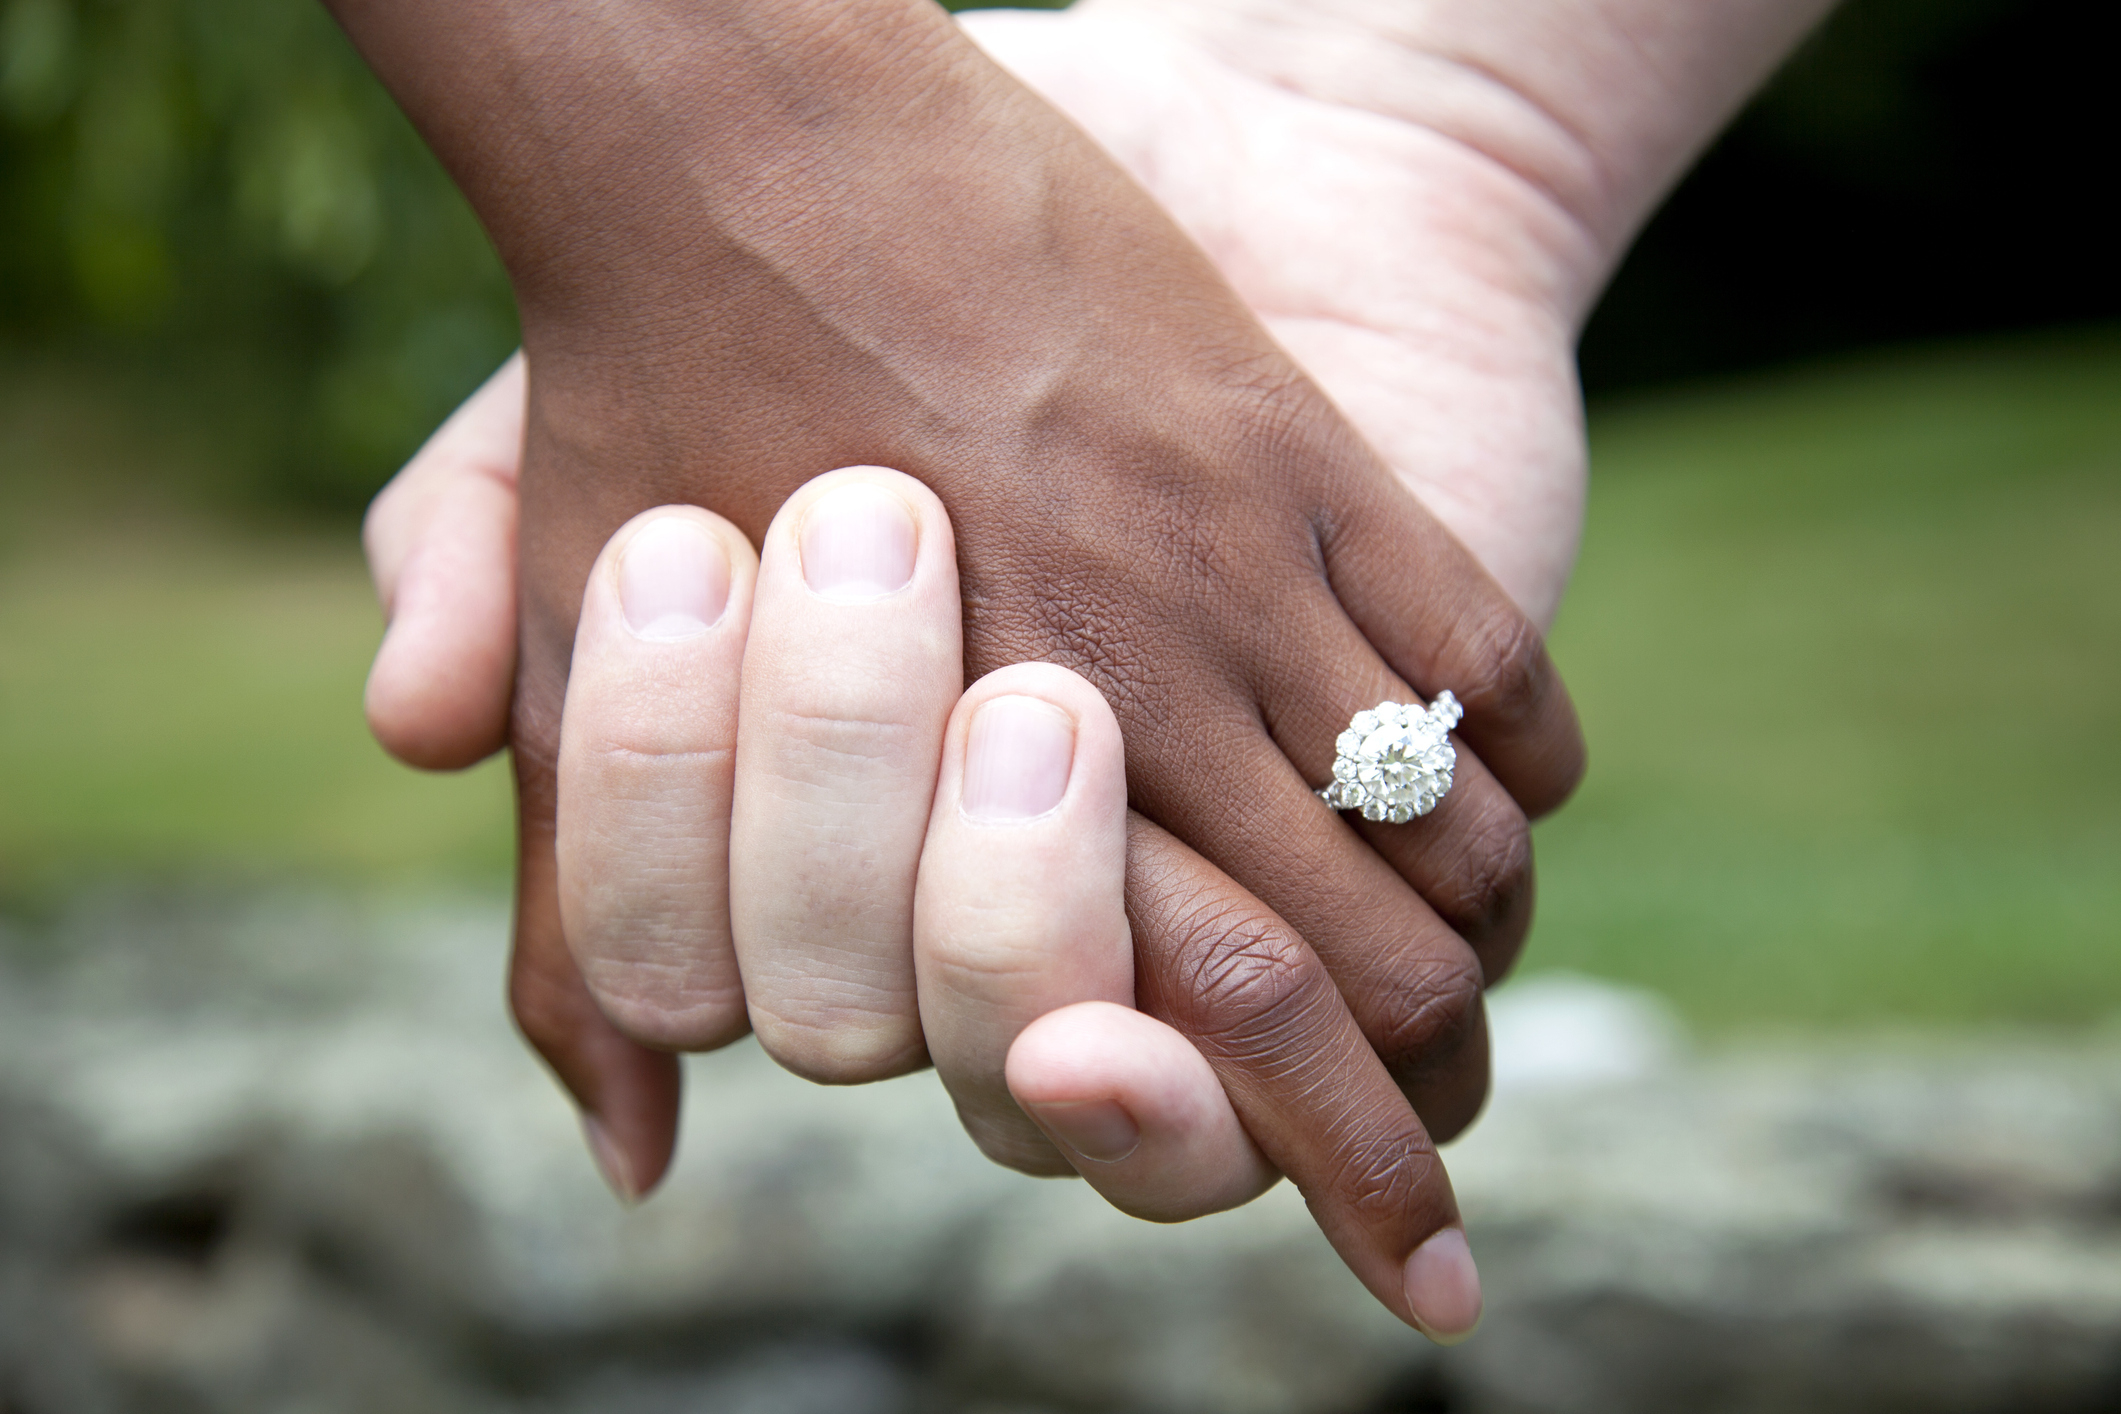 Two people holding hands, one wearing an engagement ring